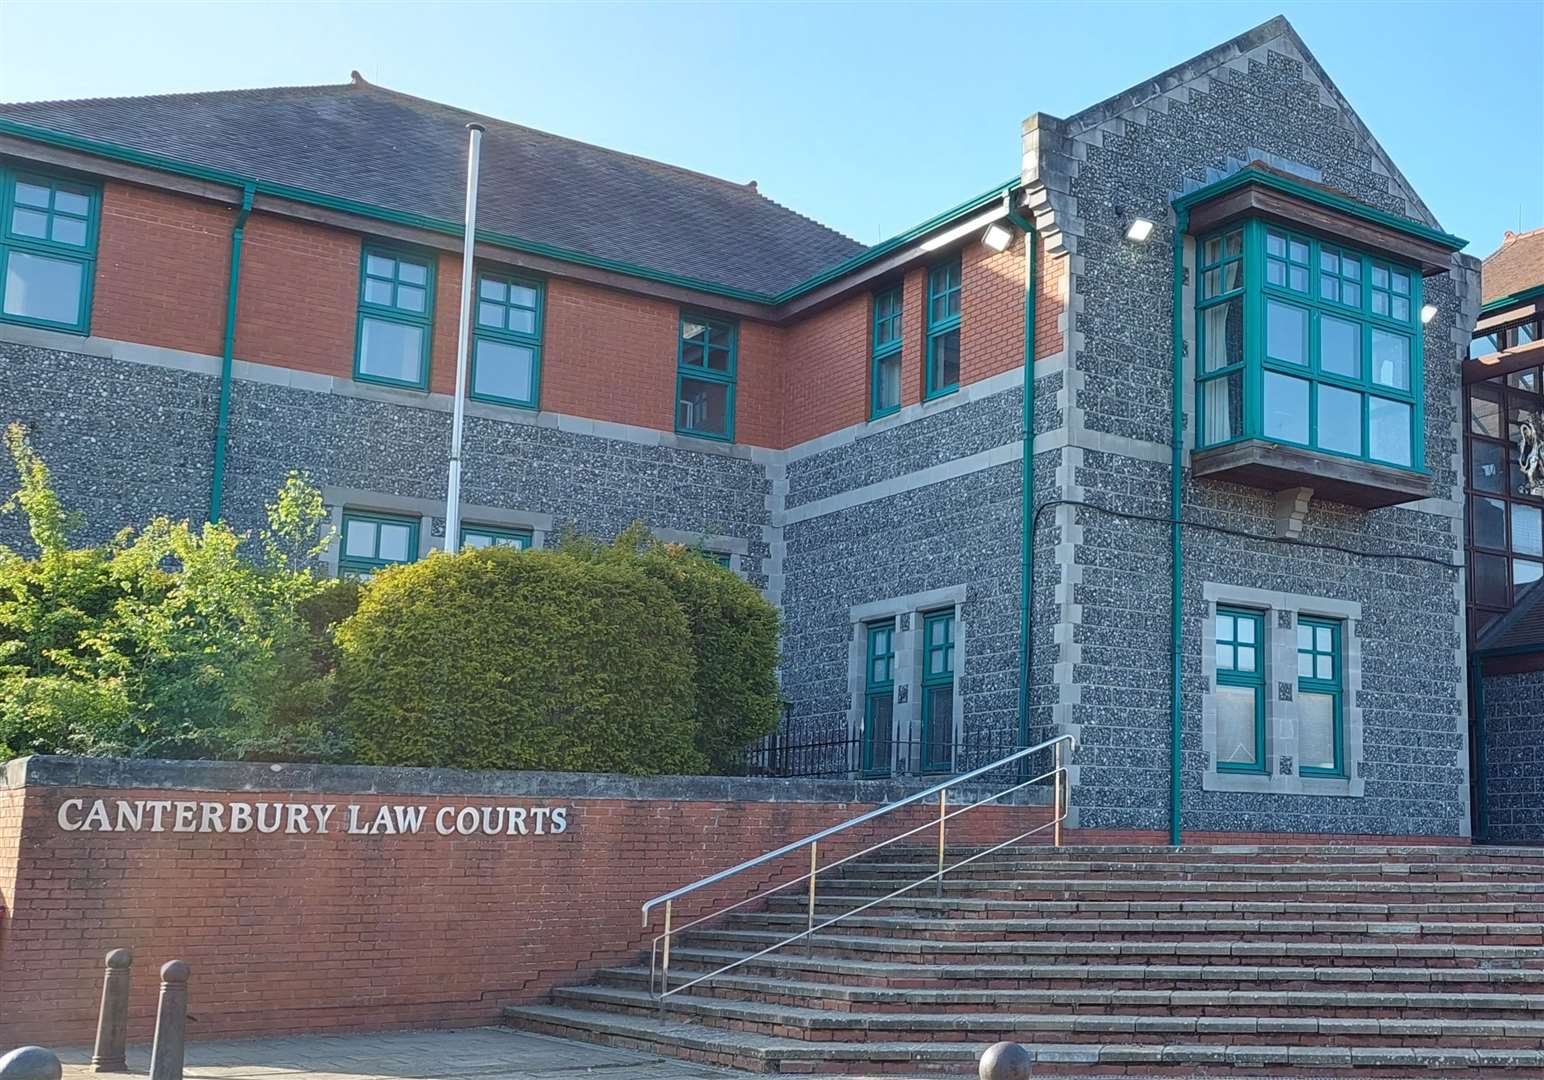 The criminal was sentenced on Wednesday at Canterbury Crown Court